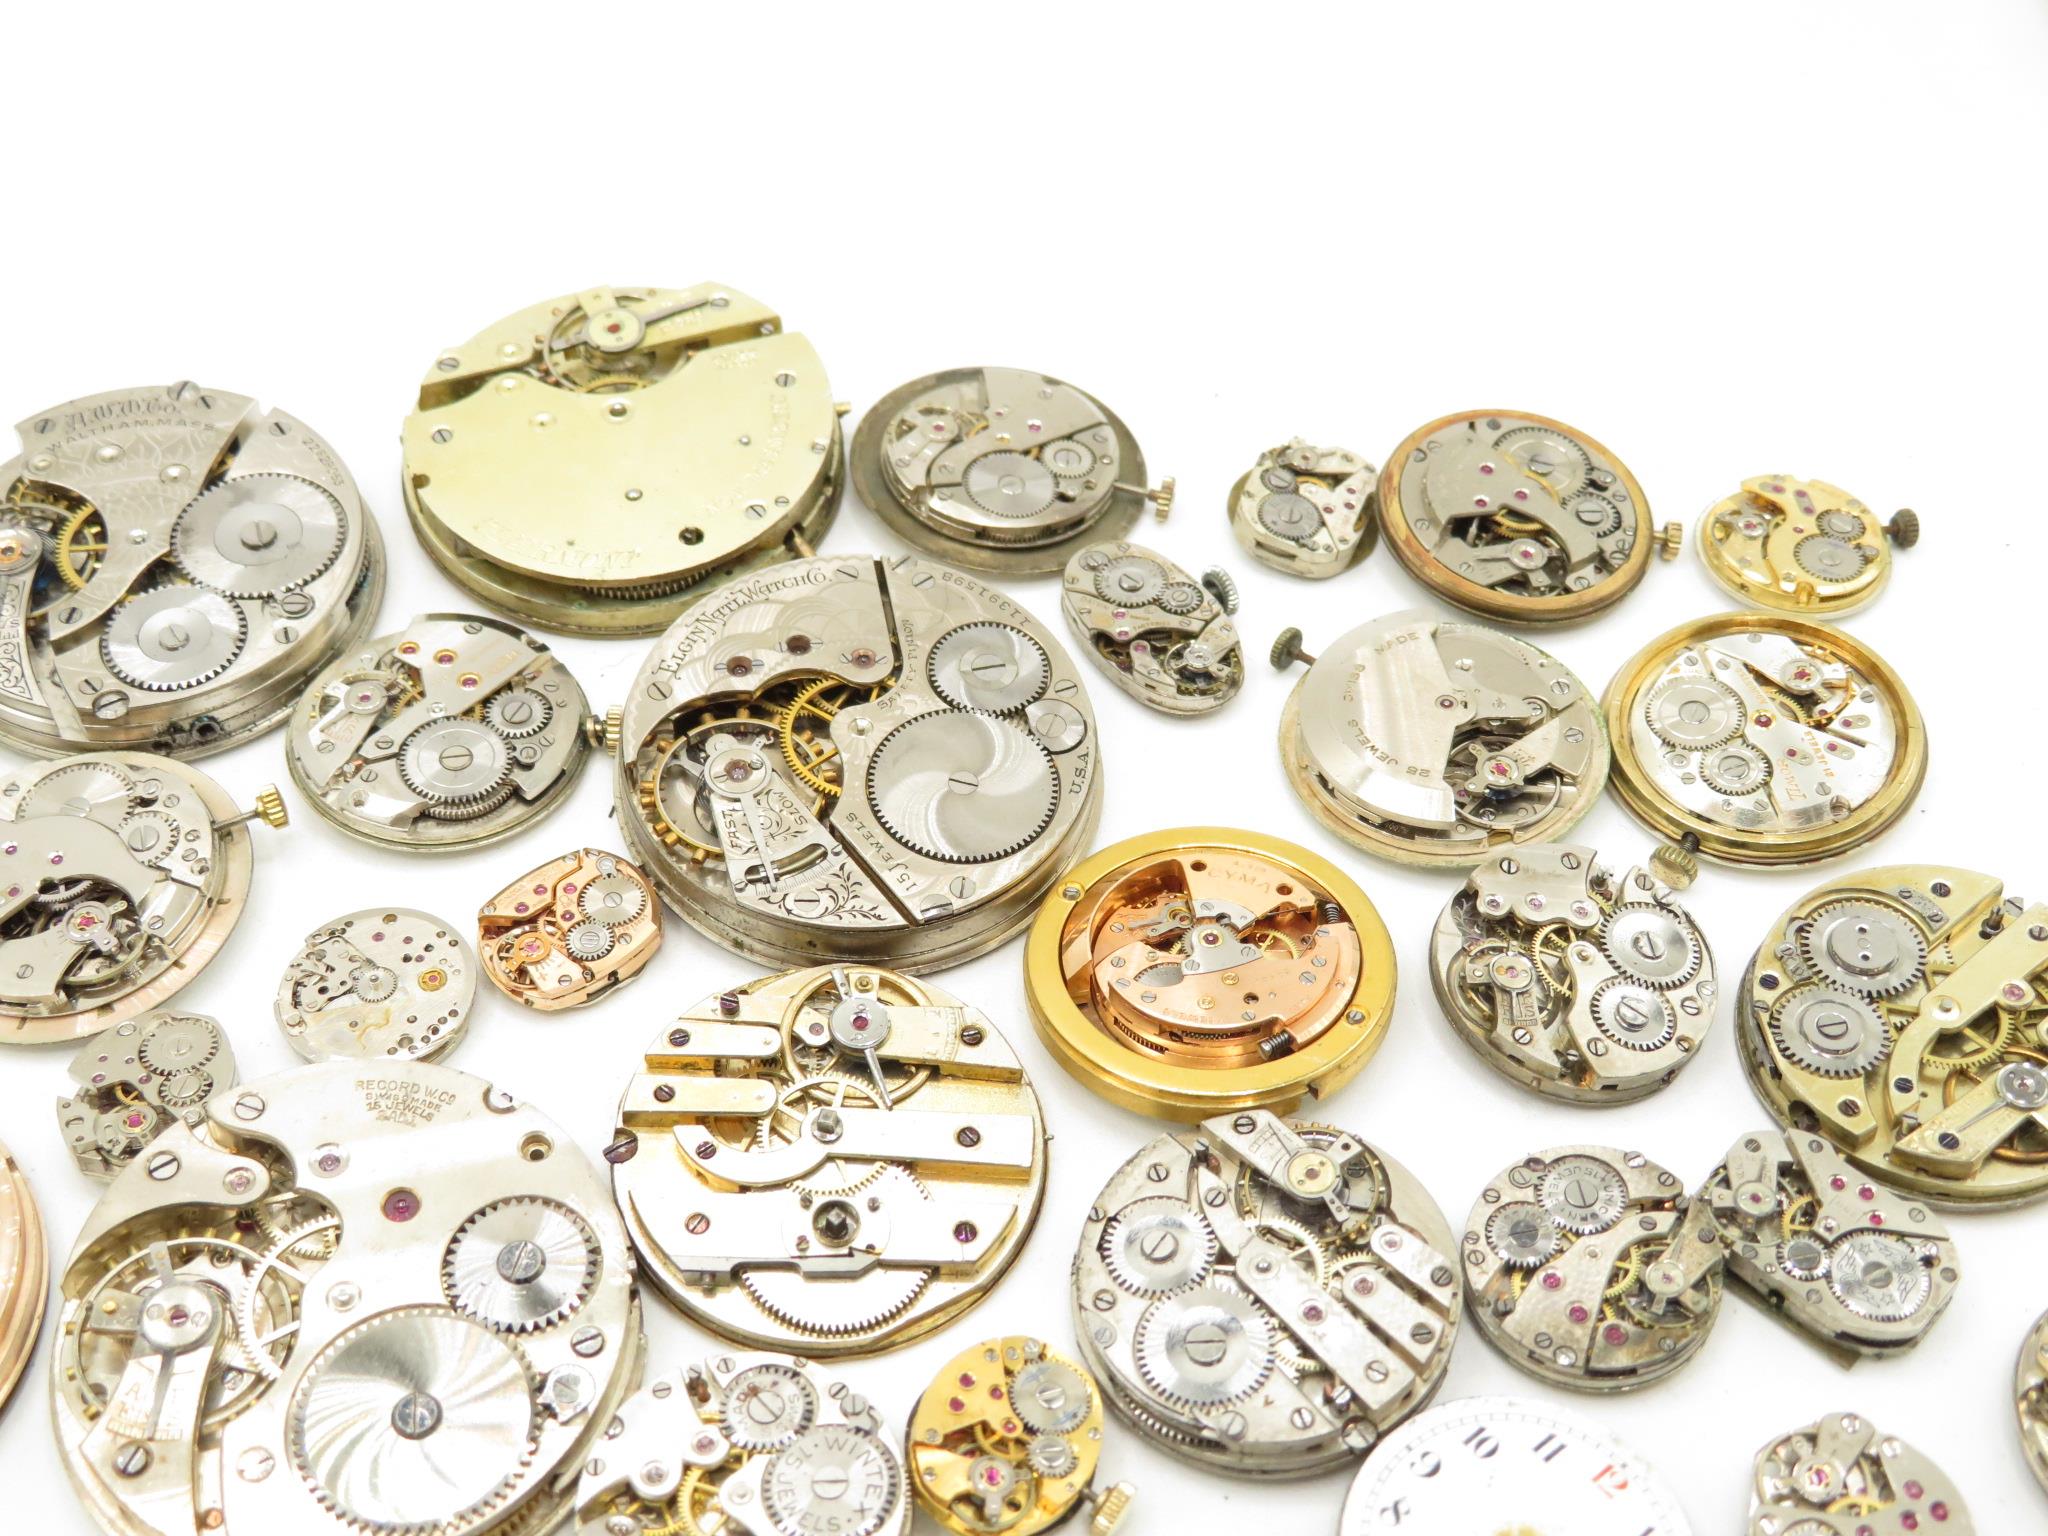 Bag of pocket watch and wristwatch movements 632g - Image 8 of 11